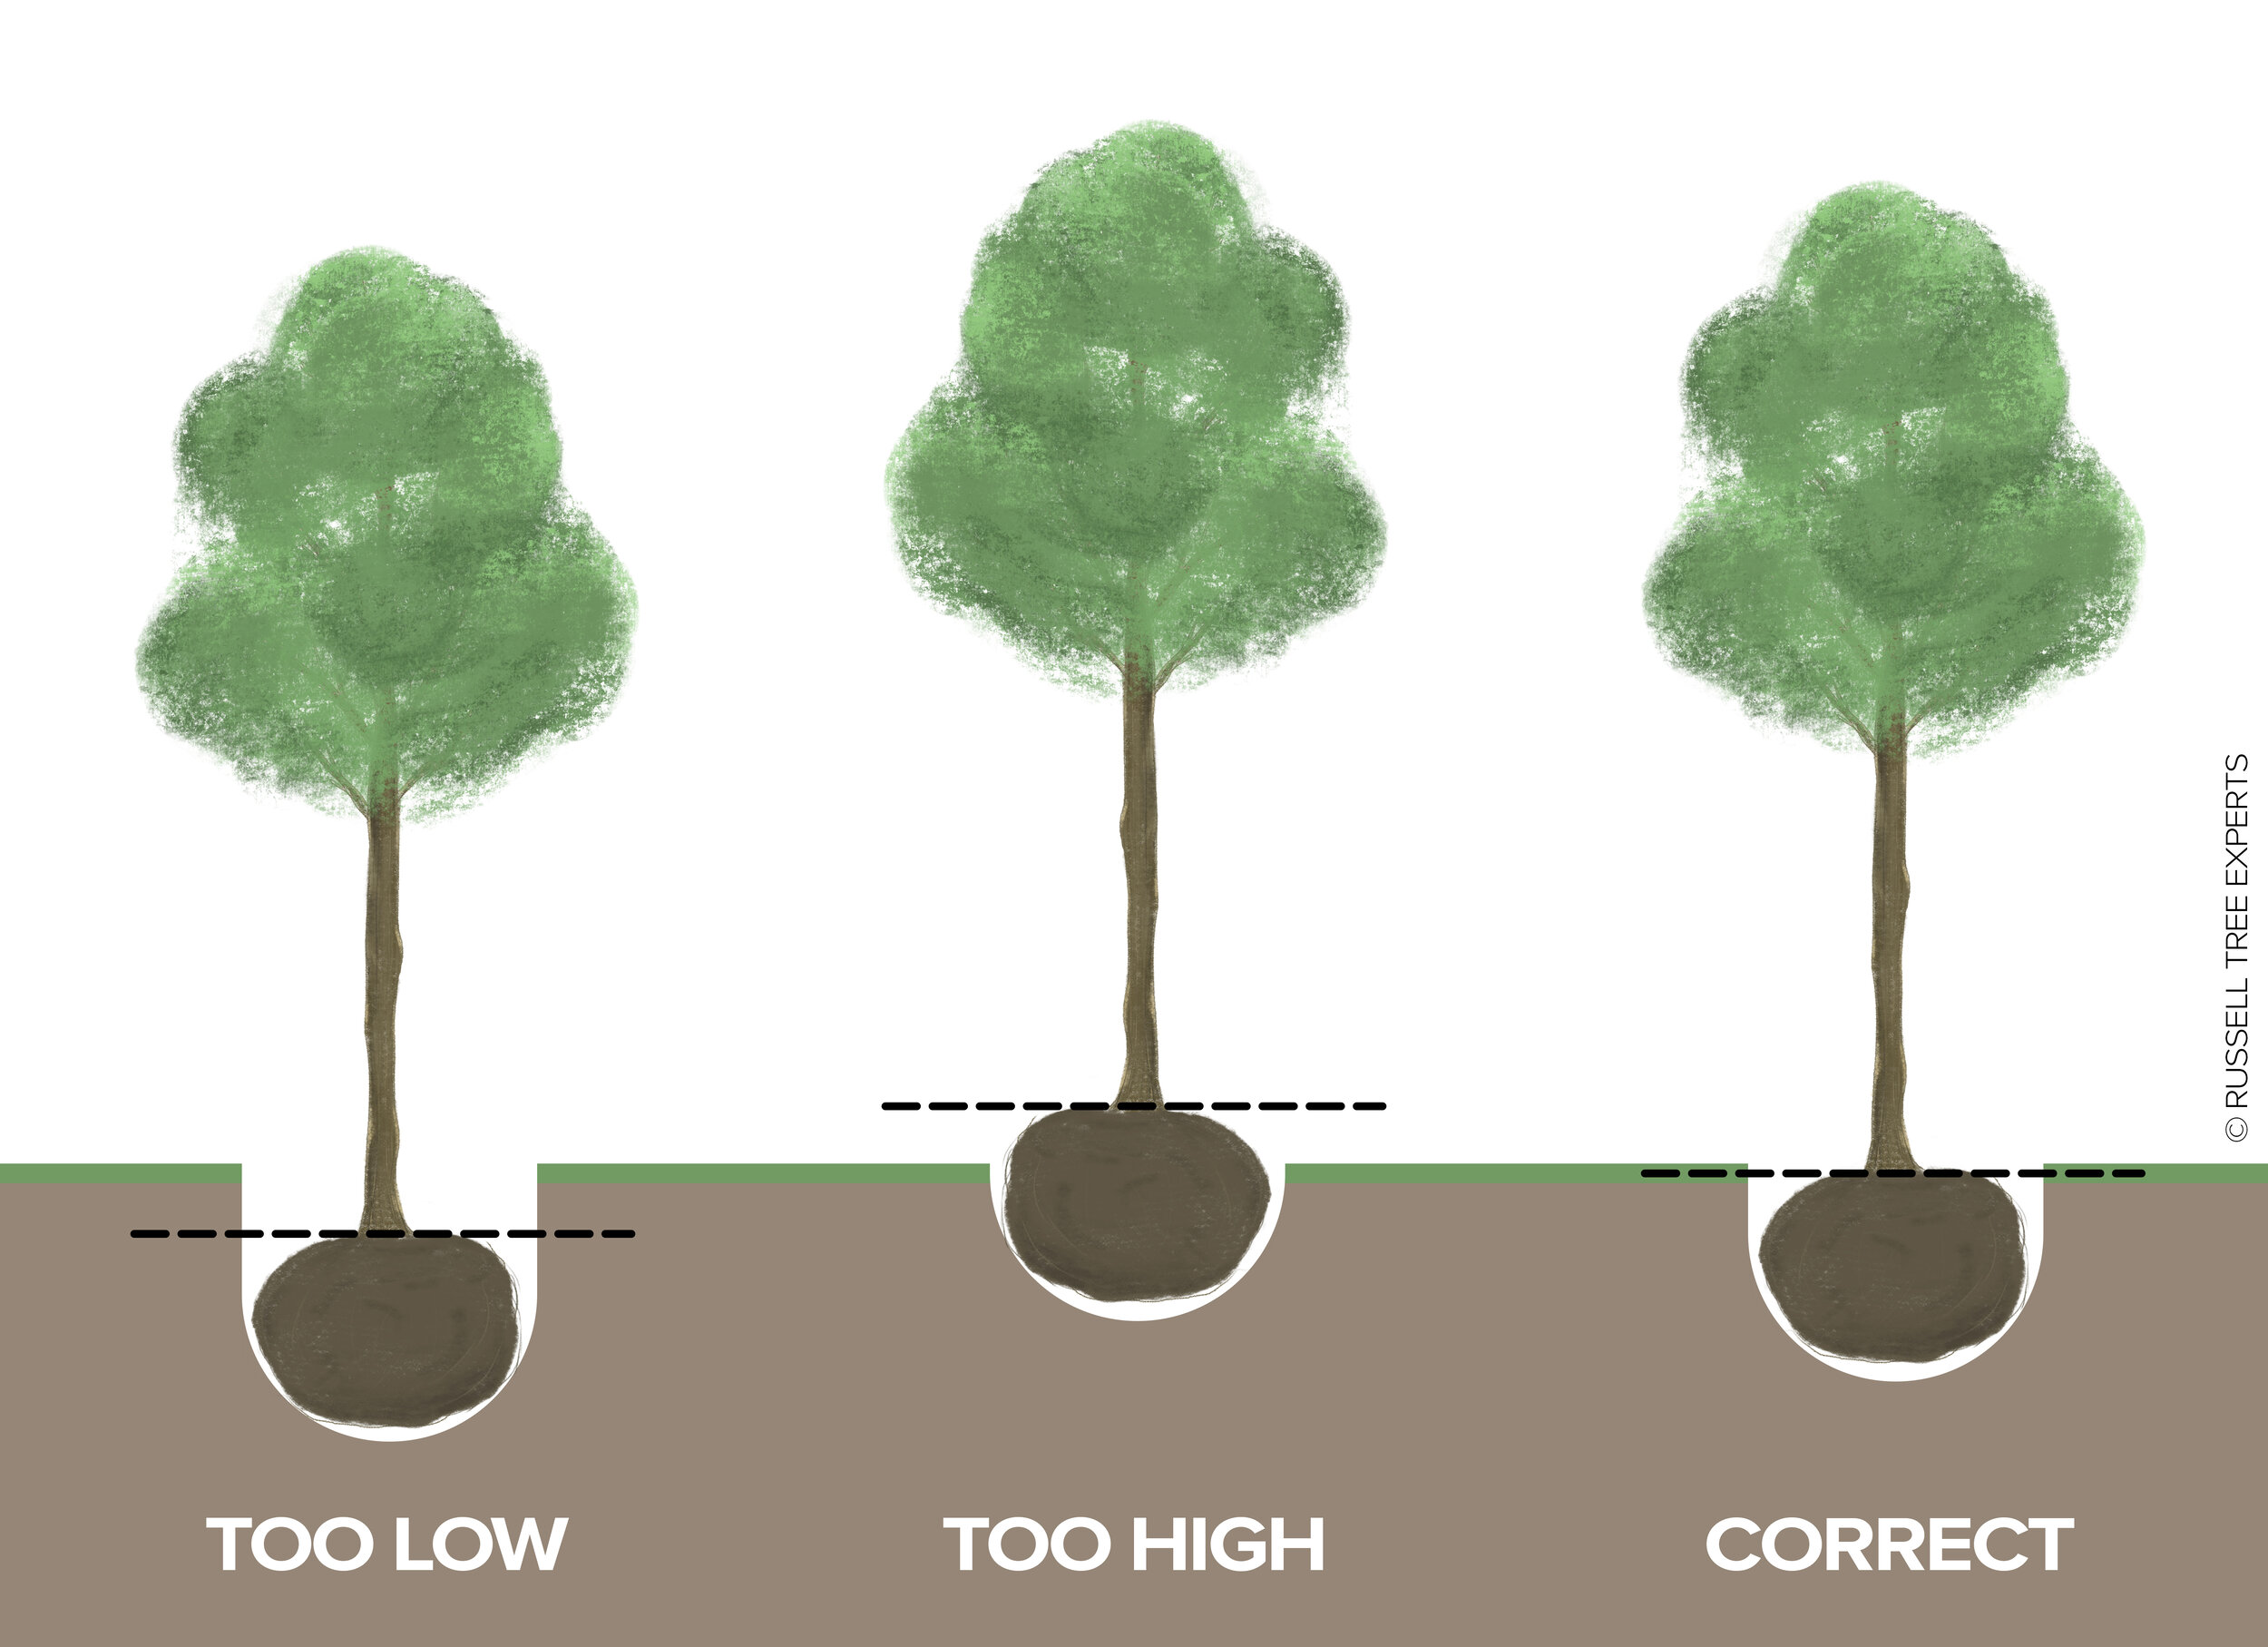 Russell Tree Experts — Planting Trees Is Easy Right